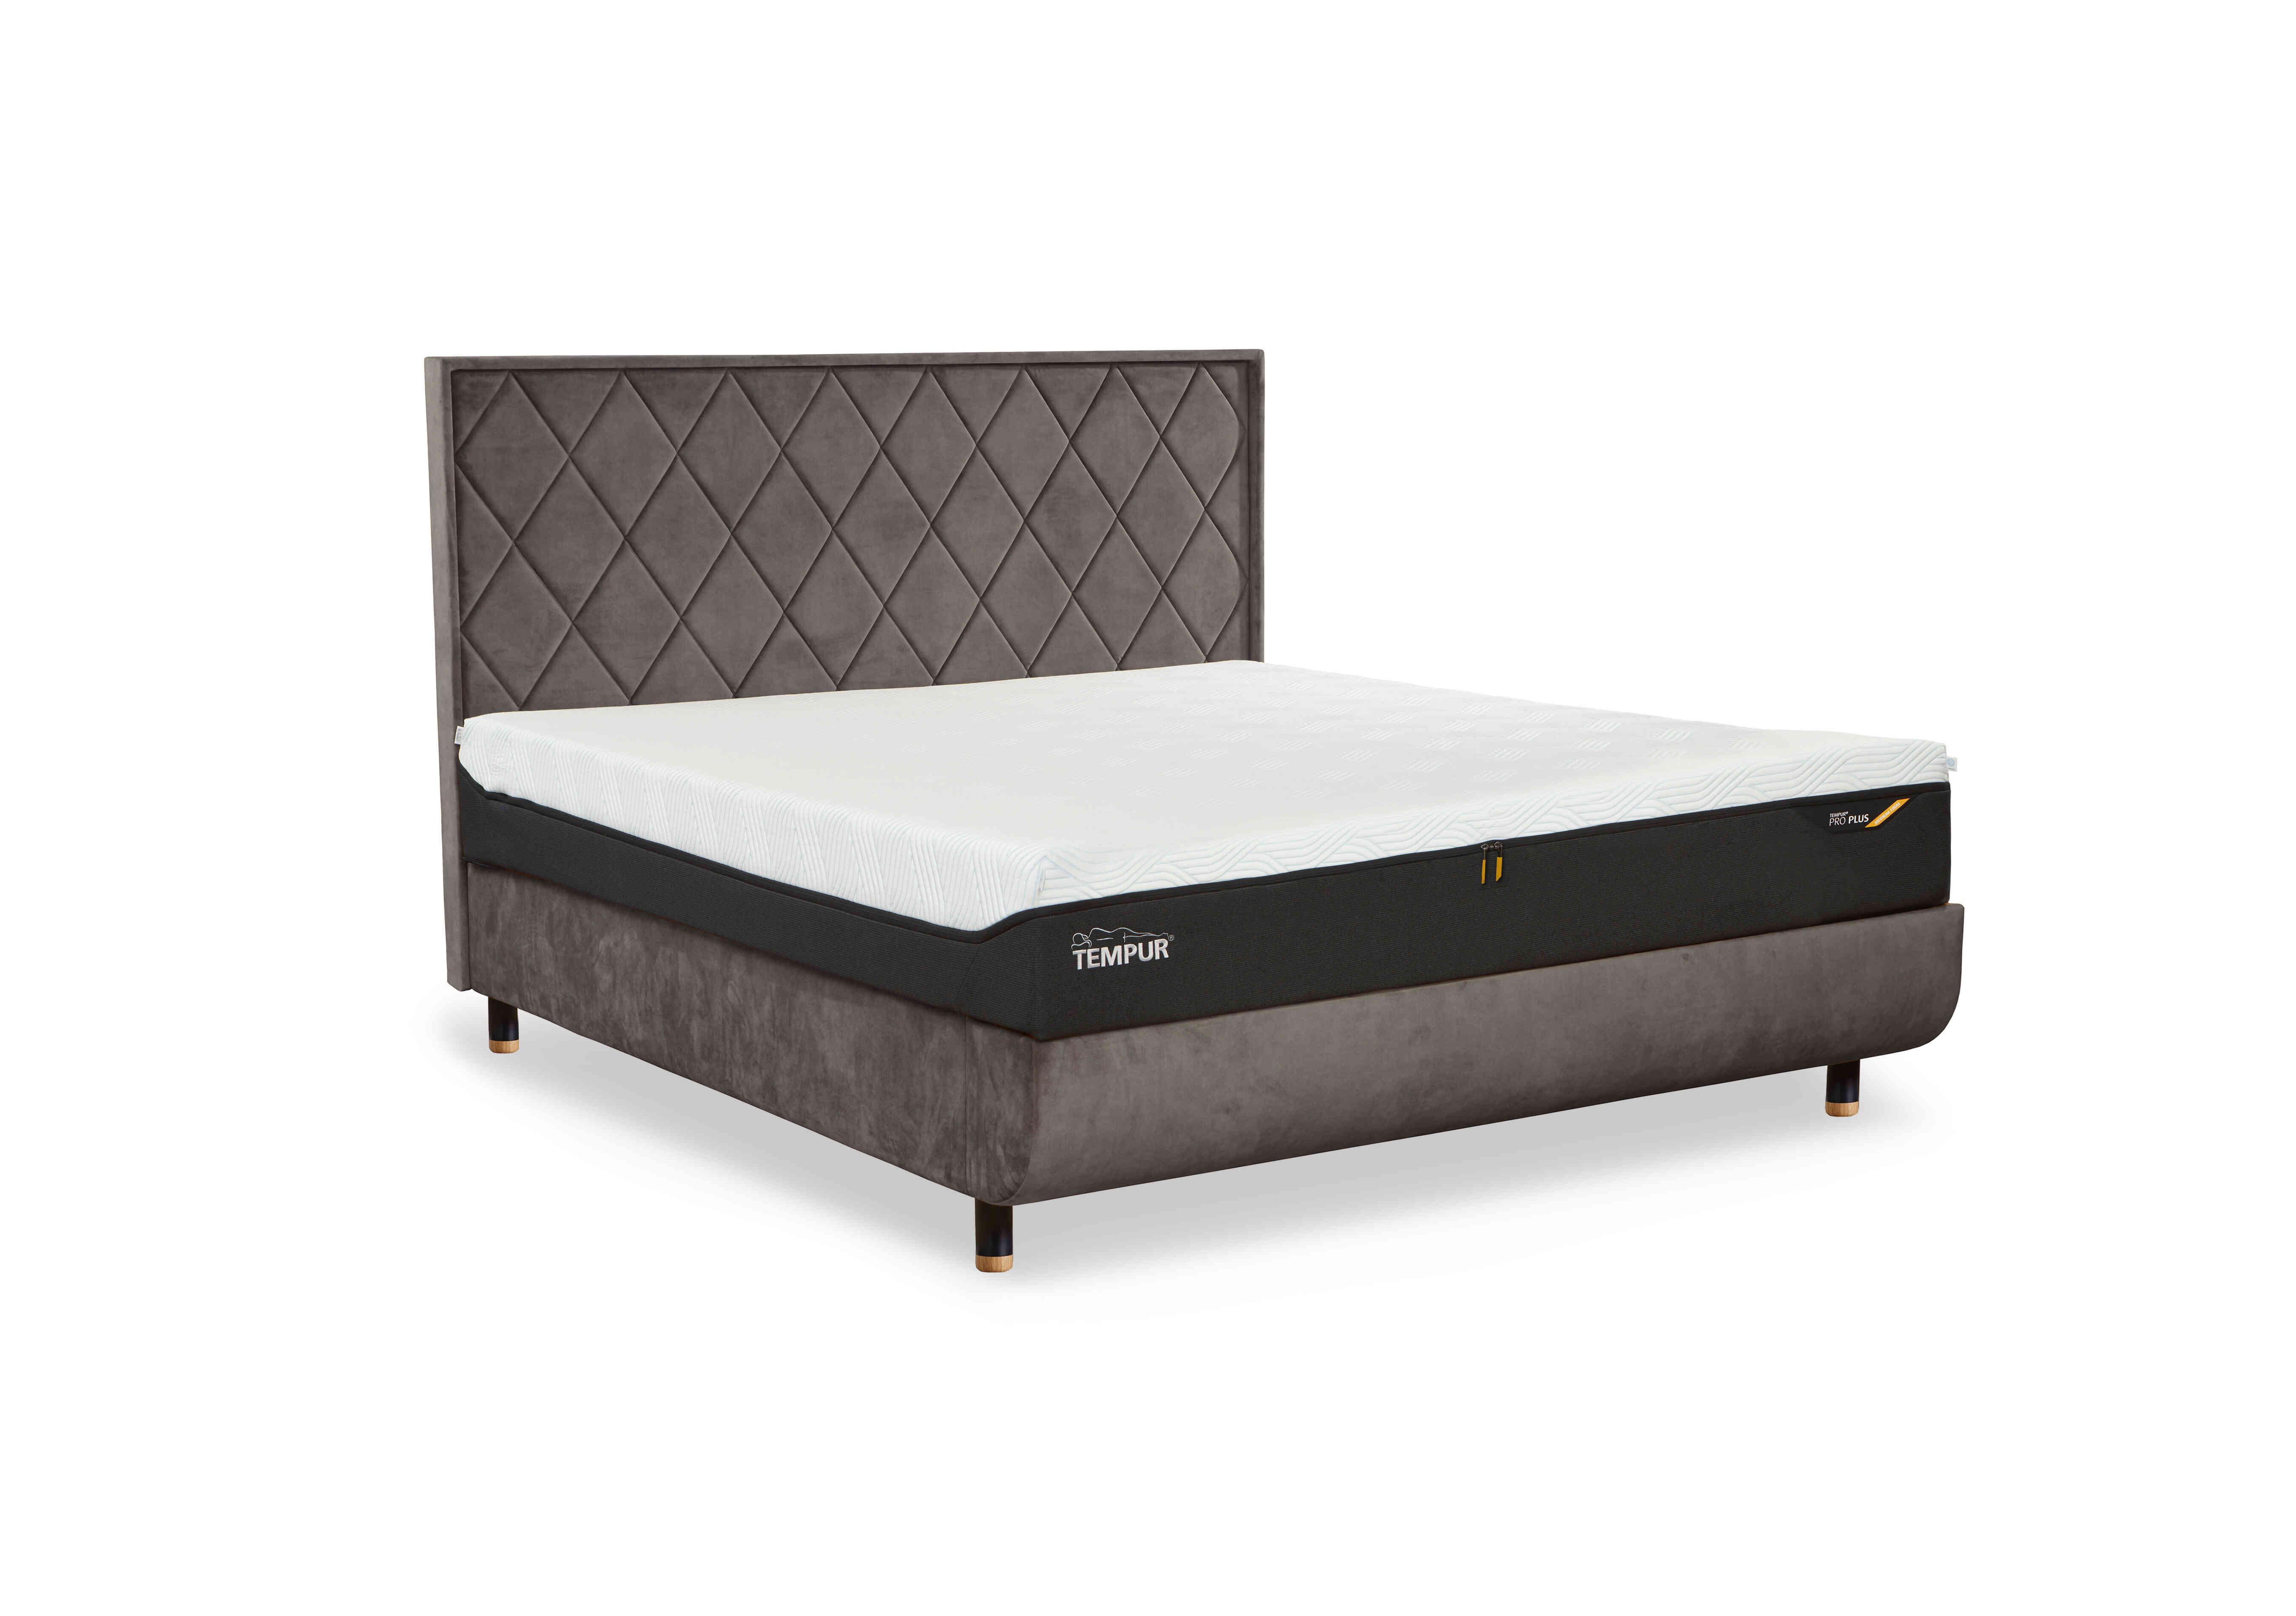 Arc Slatted Ottoman Bed Frame with Quilted Headboard in Warm Stone-Black/Oak Feet on Furniture Village